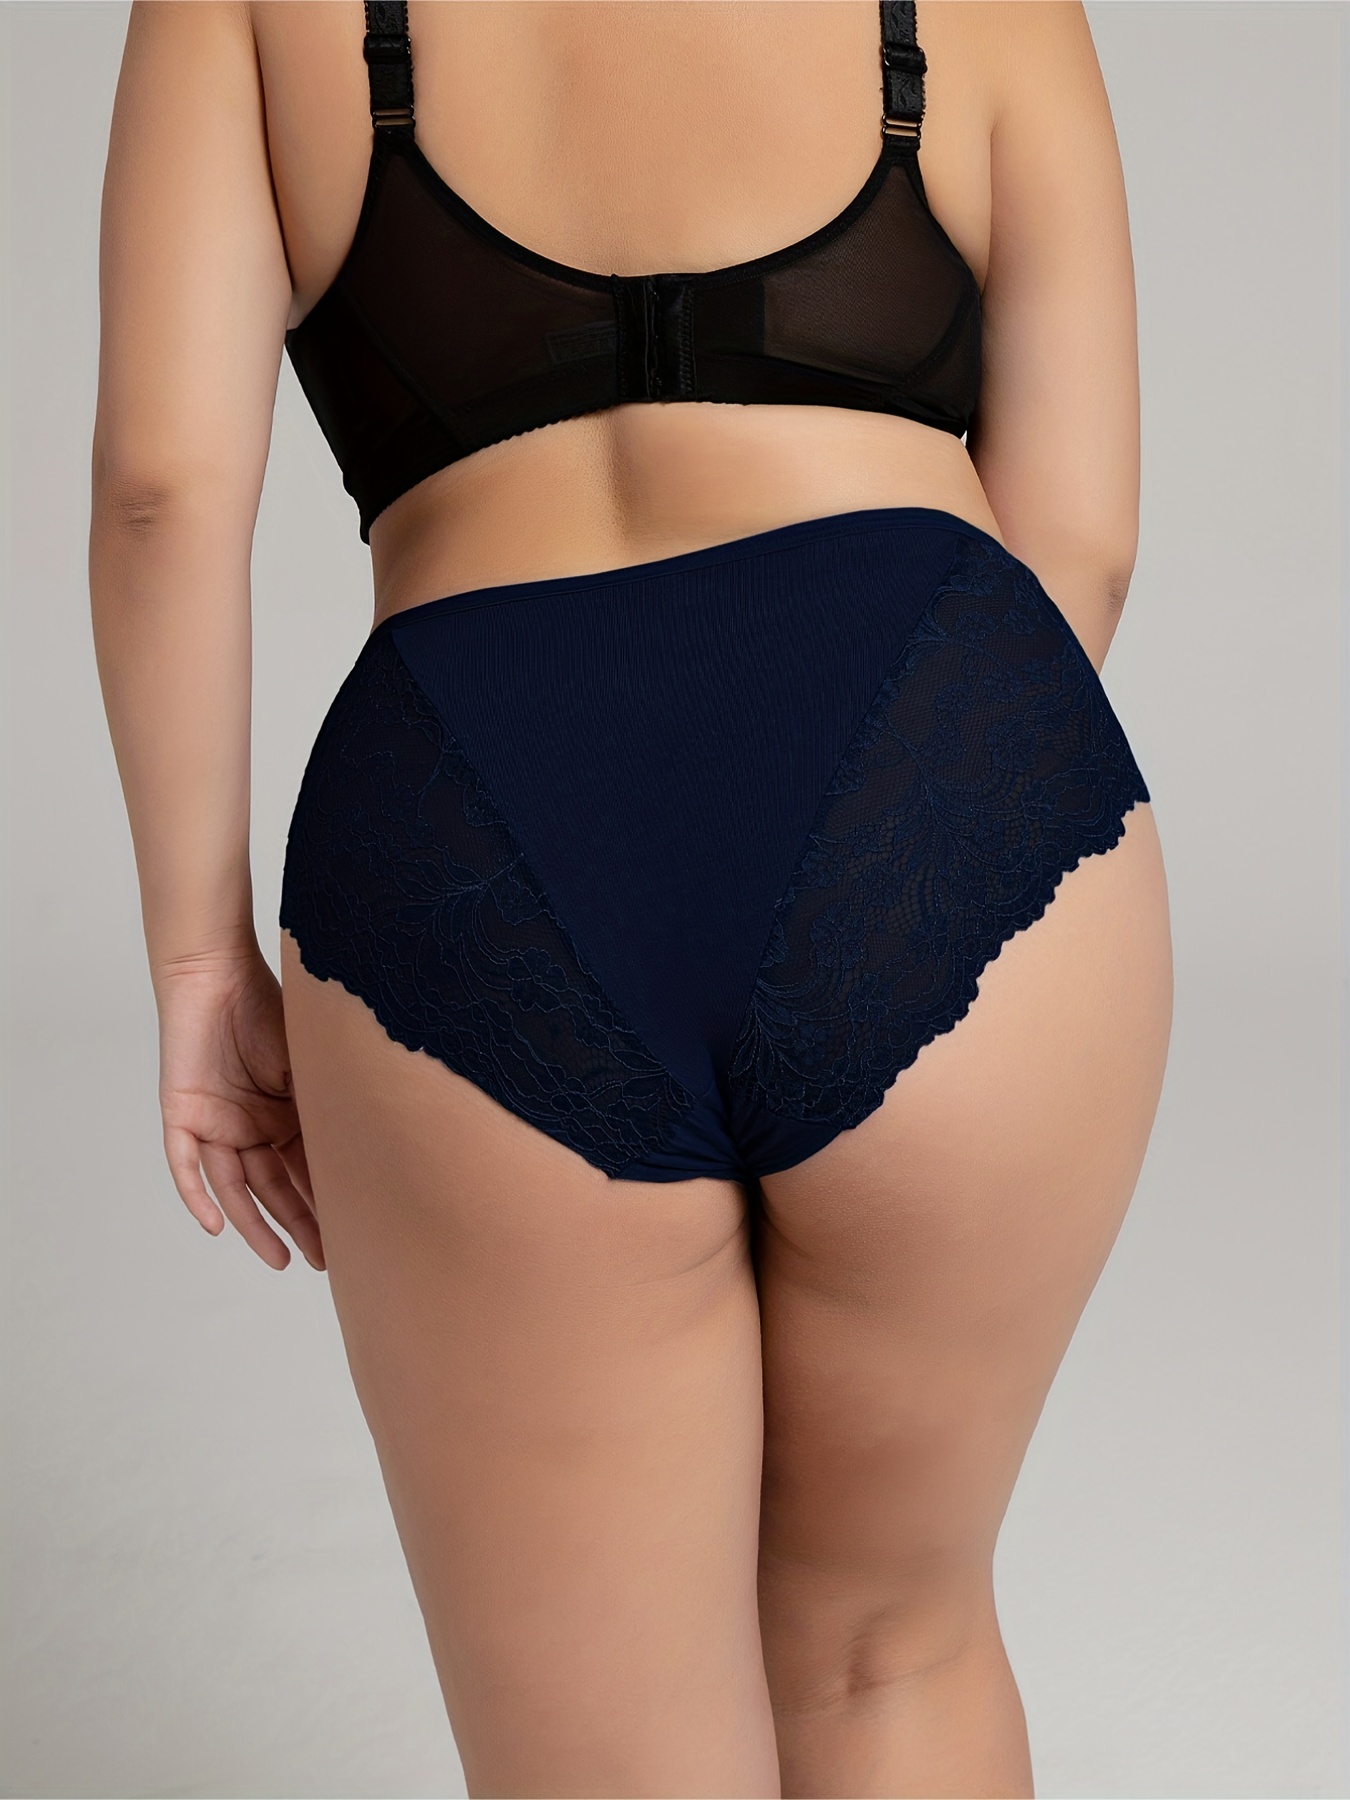 JDEFEG Orders To Be Delive Women Plus Size Lace High Waist Panties